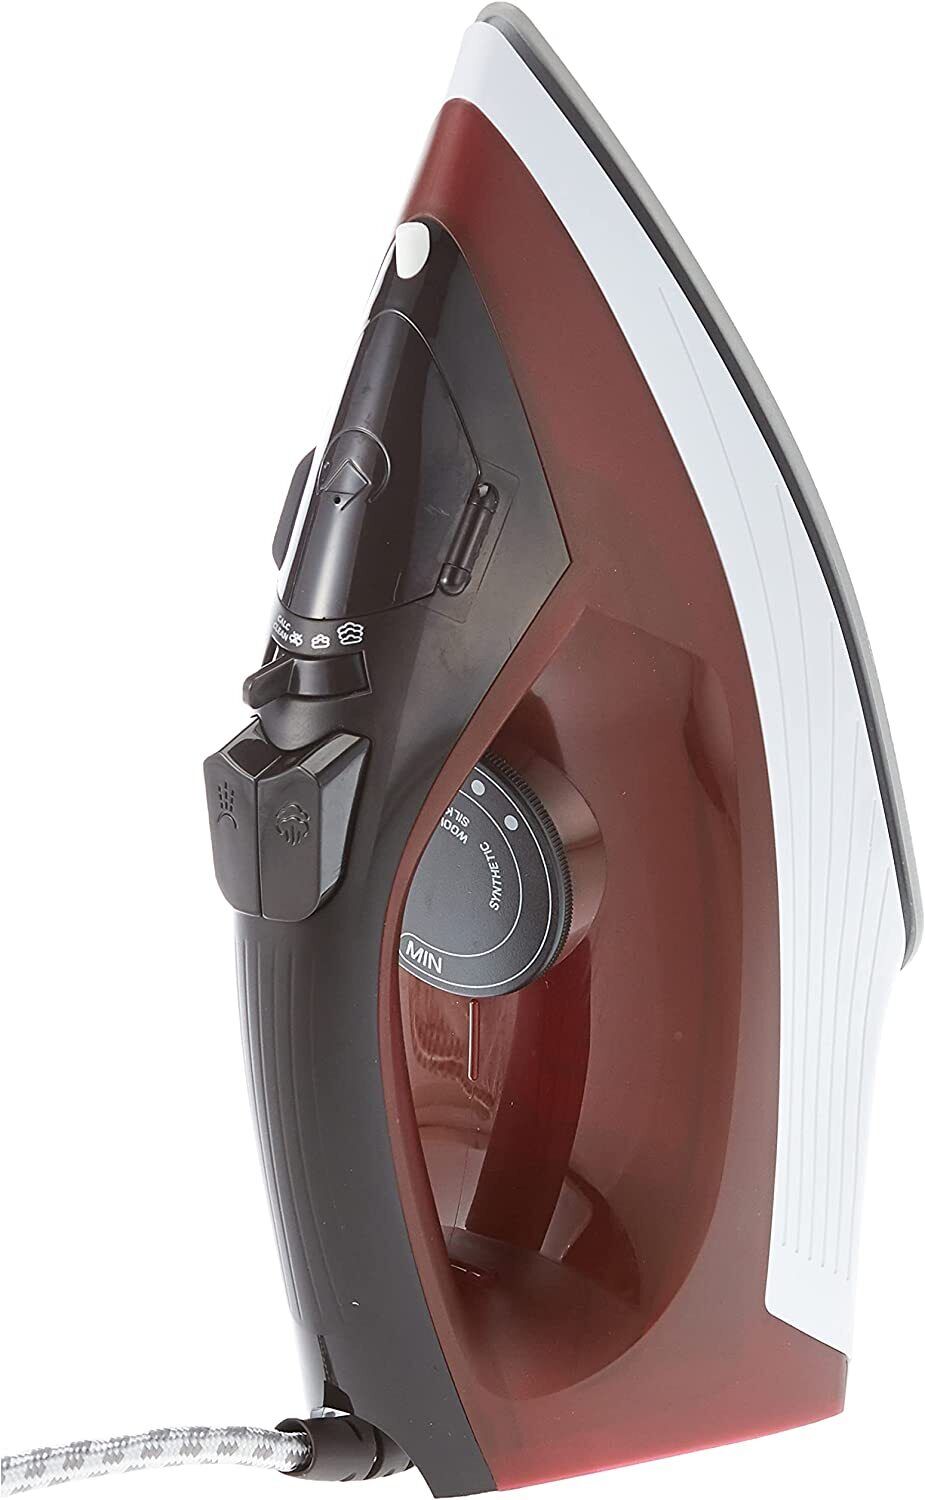 Black And Decker X1550 220 Volt Non-Stick Steam Iron Self Cleaning 220V 240V For Export